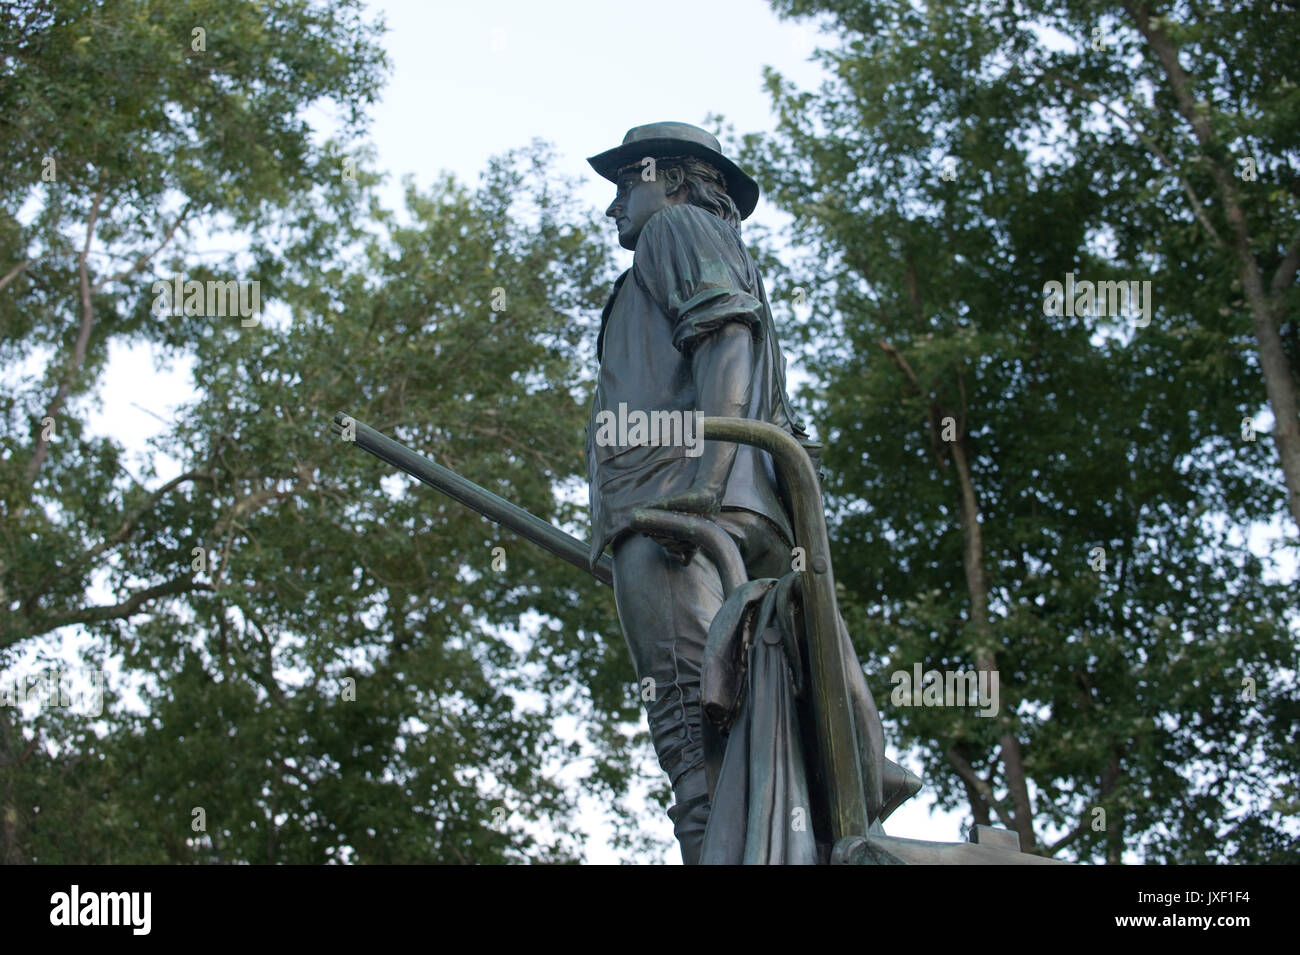 The Minute Man statue in Minute Man National Historical Park, Concord, Massachusetts. Stock Photo